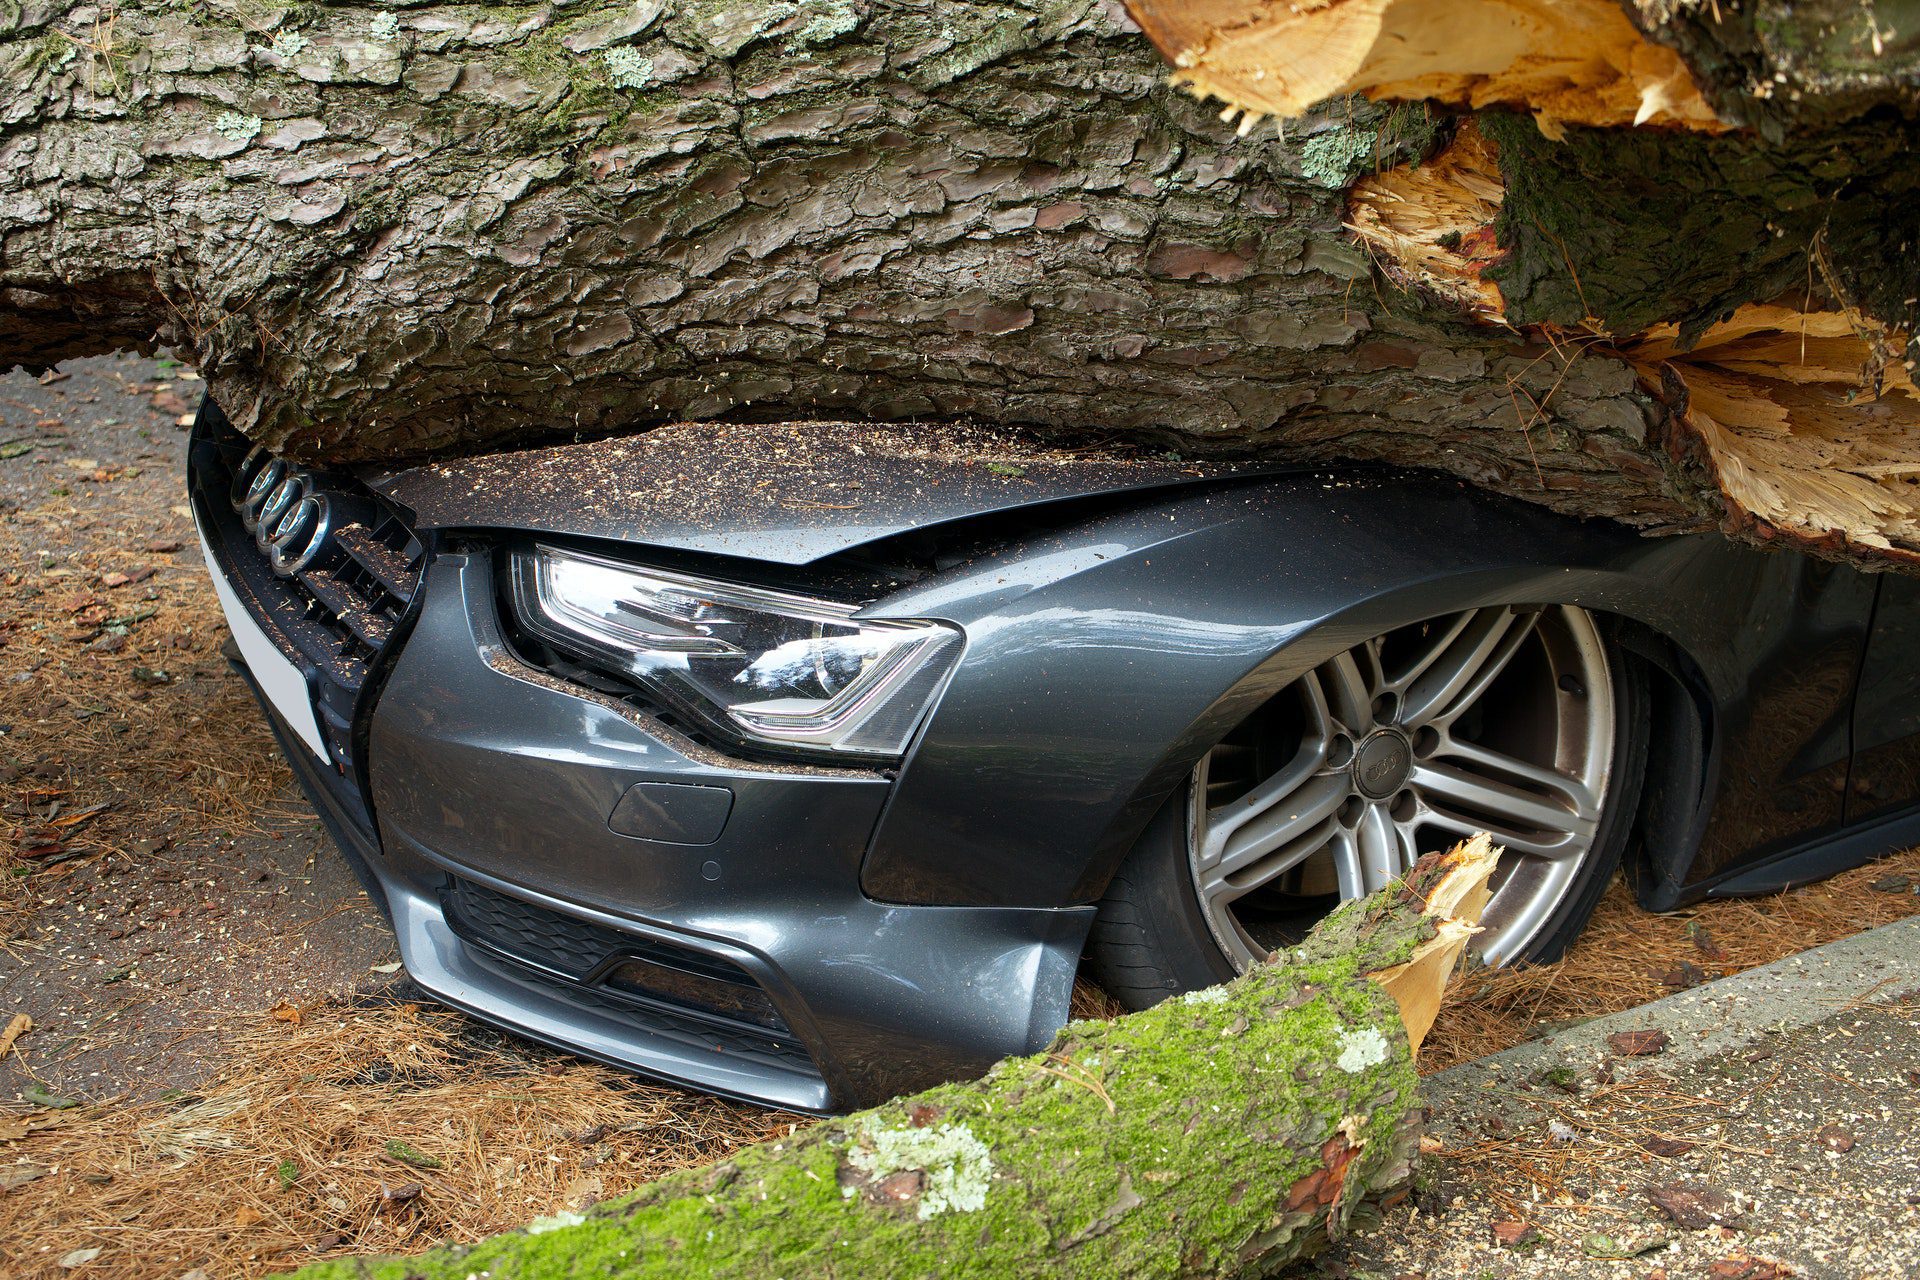 Audi crushed under a tree